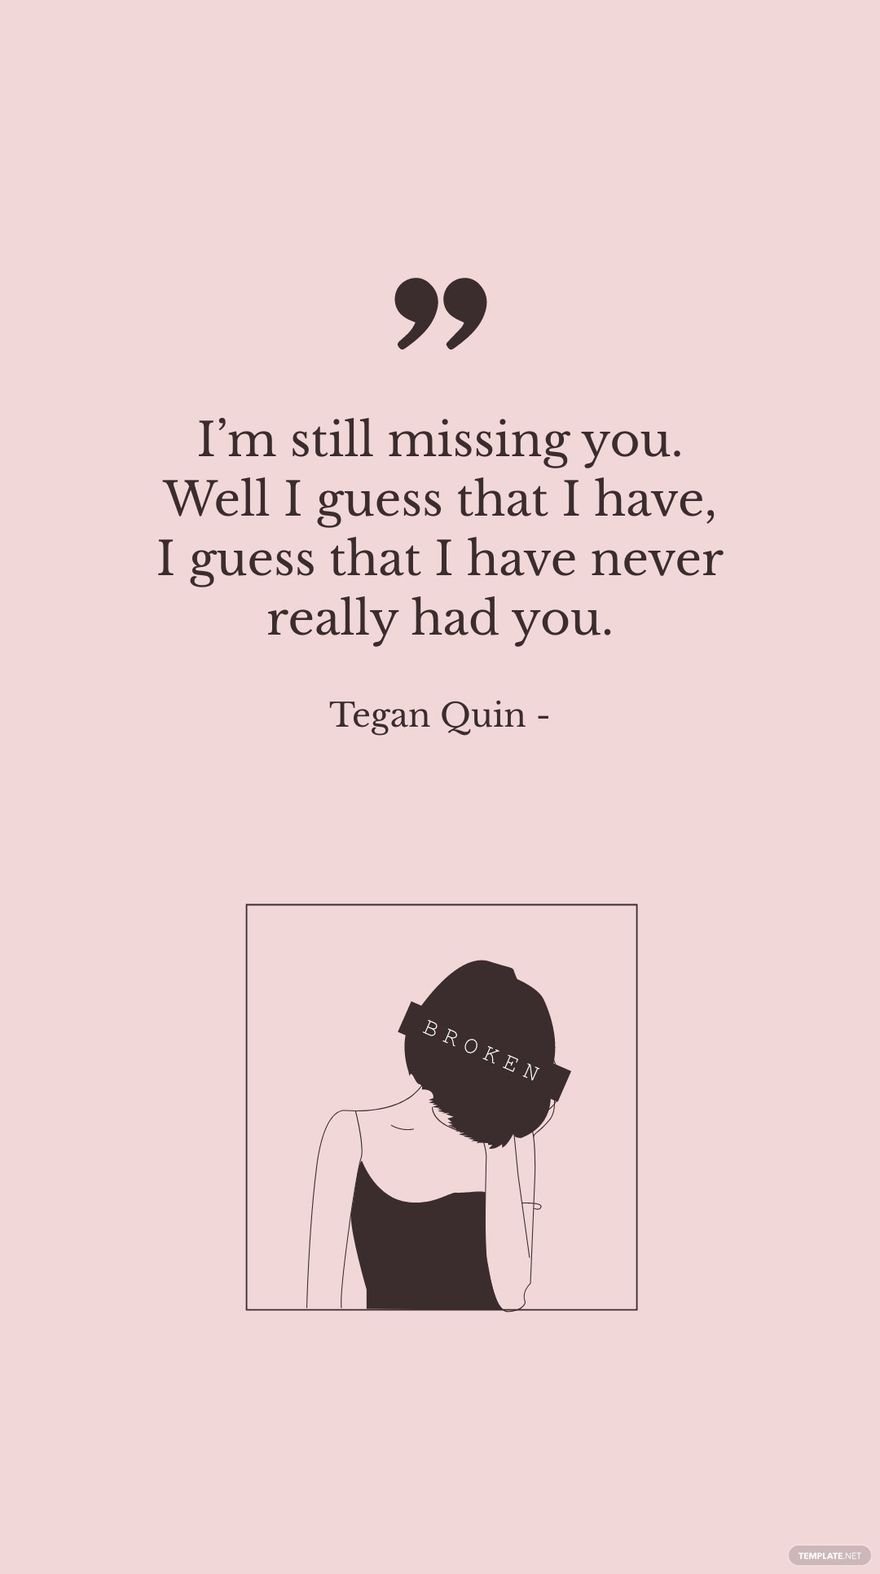 Free Tegan Quin - I’m still missing you. Well I guess that I have, I guess that I have never really had you. in JPG